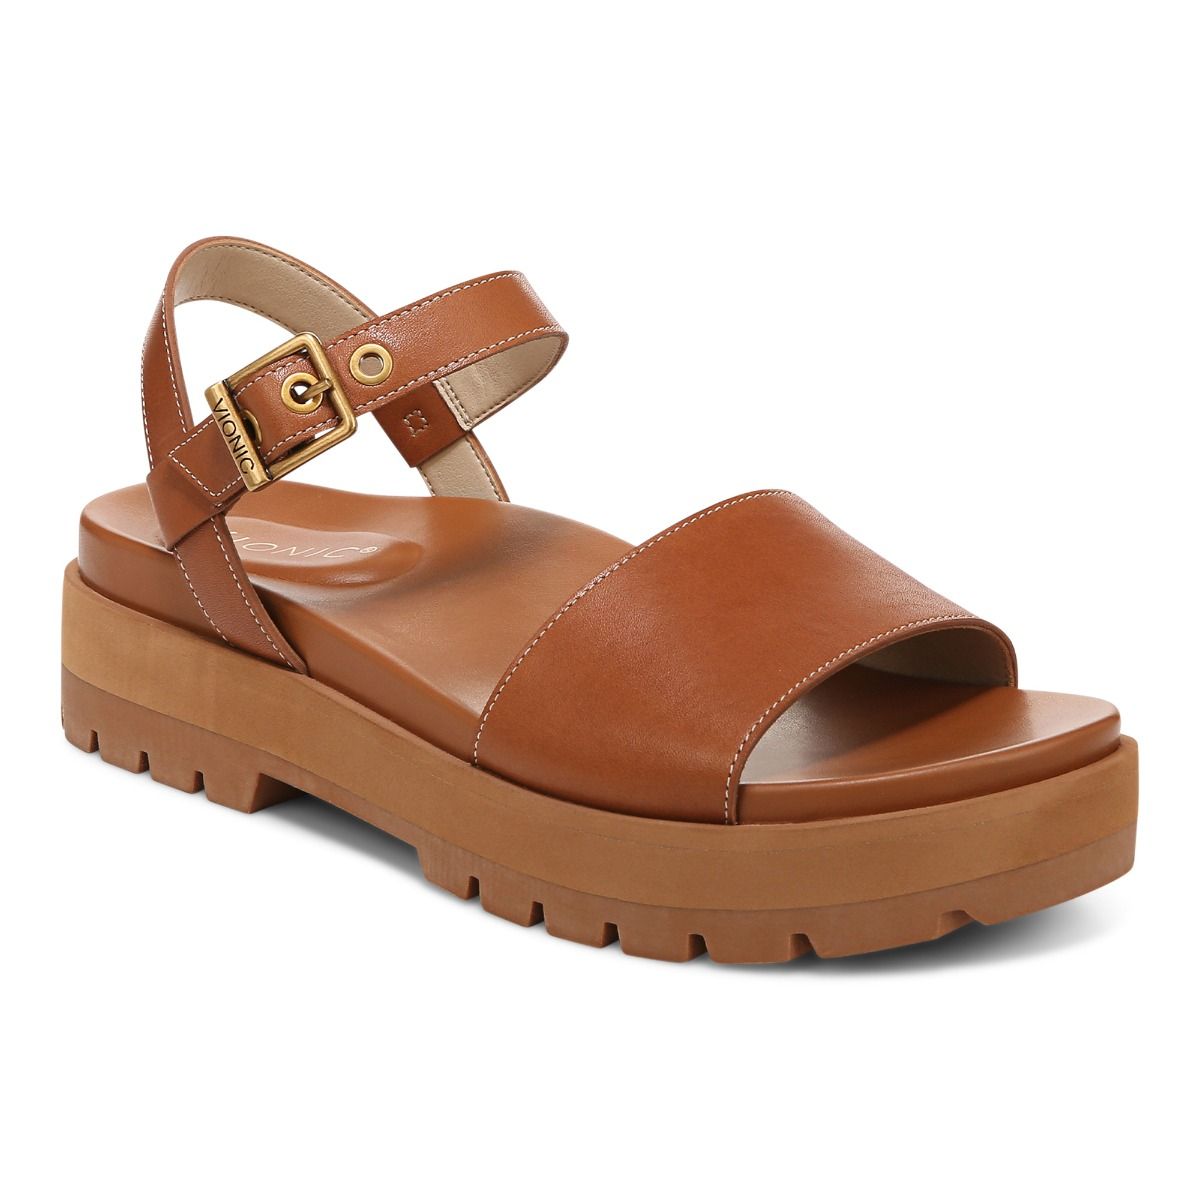 Shop this '90s Trend for the Best Affordable New Sandals